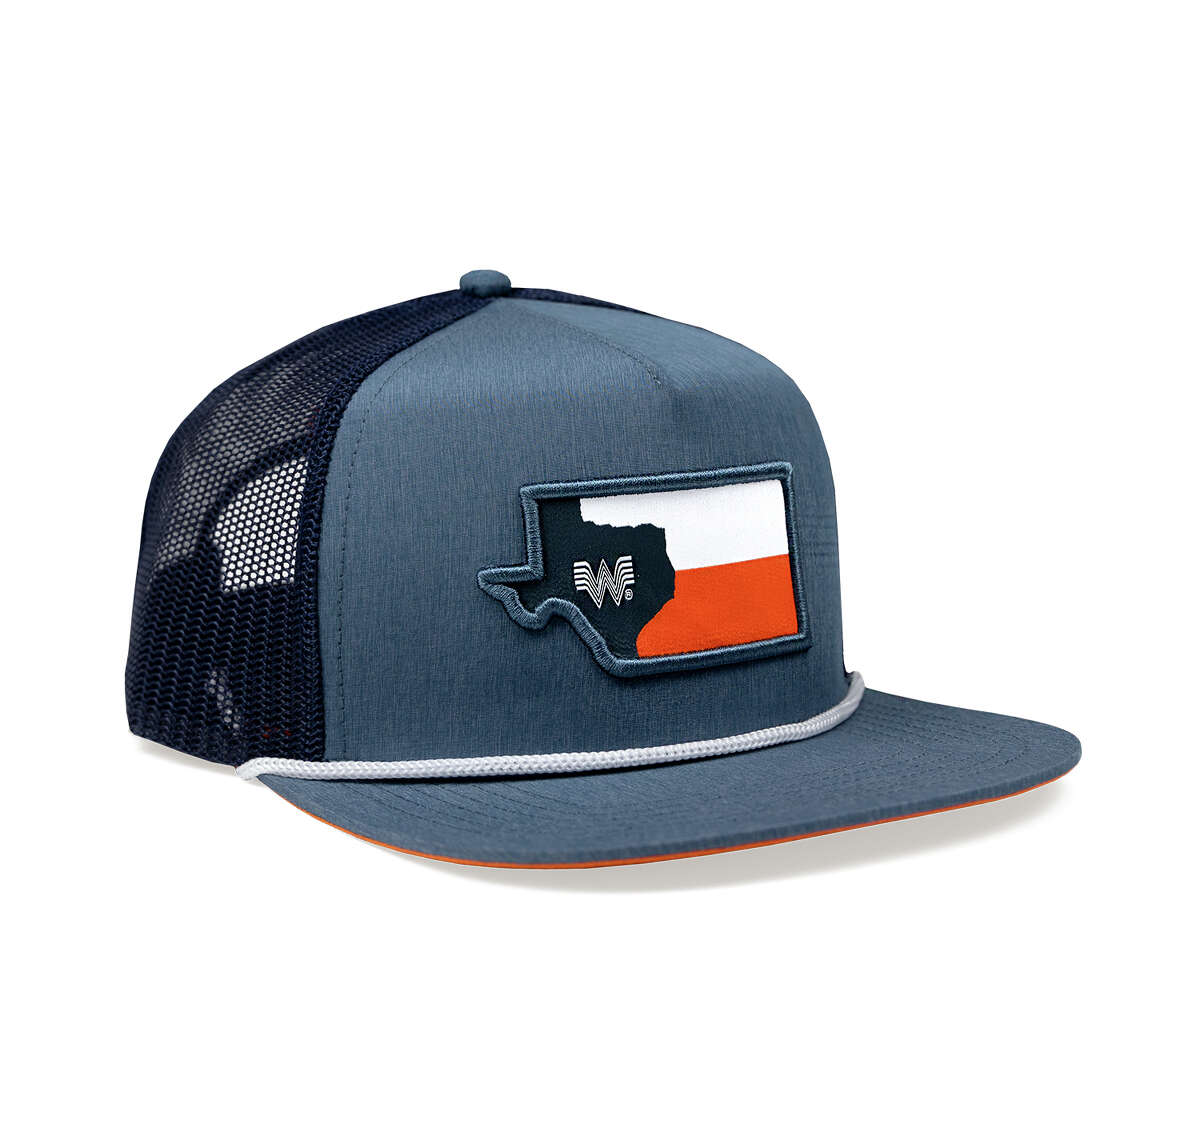 Whataburger’s Texas-themed apparel made in collaboration the New Braunfels-based Staunch Traditional Outfitters.